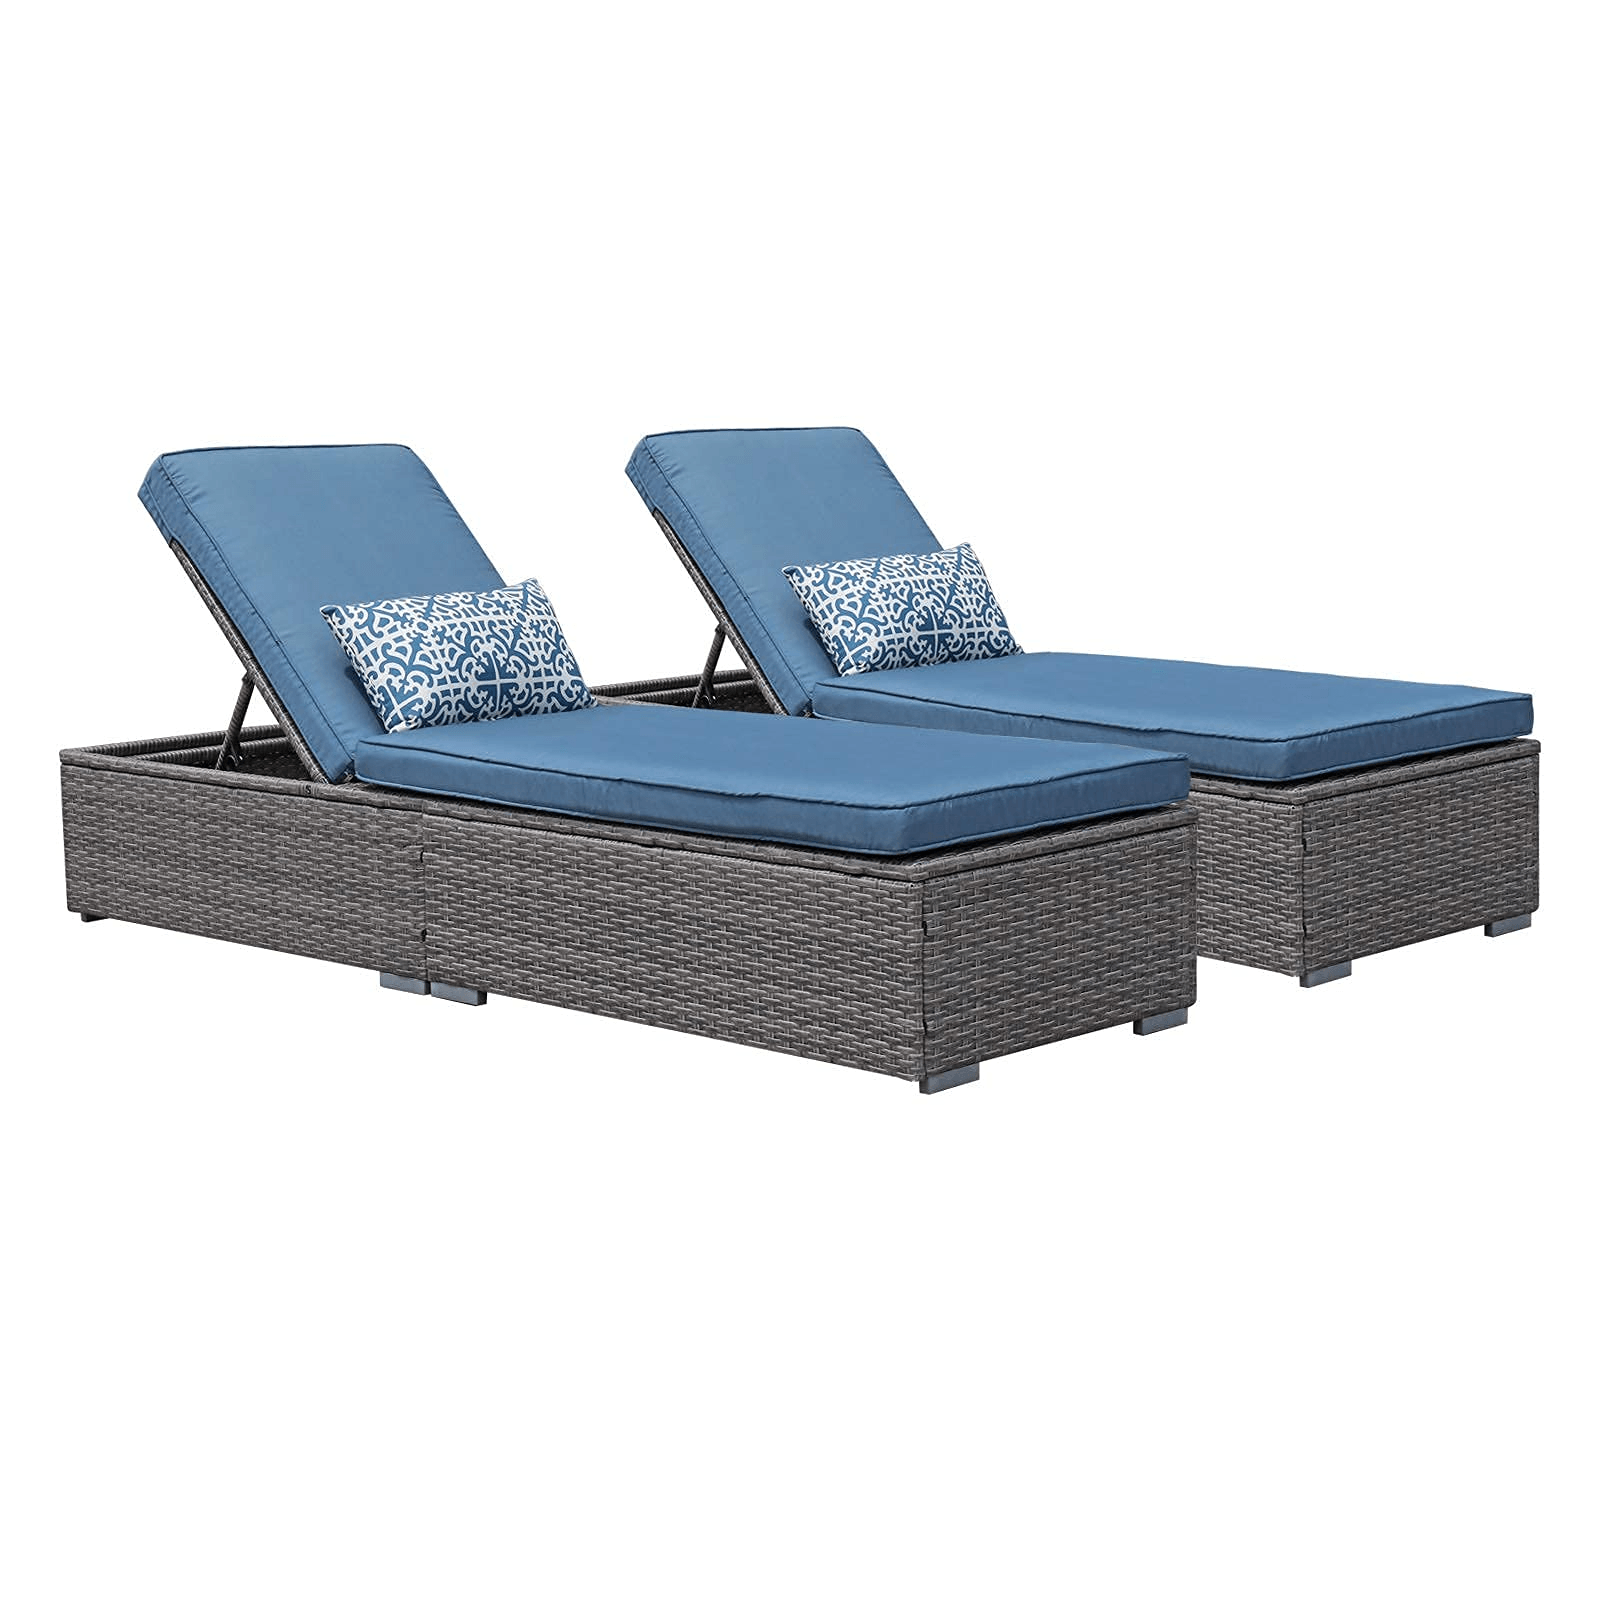 2pcs Patio Lounge Chairs Wicker Outdoor Loungers with Aegean Blue Cushions, Rectangle Shape | Orange-Casual